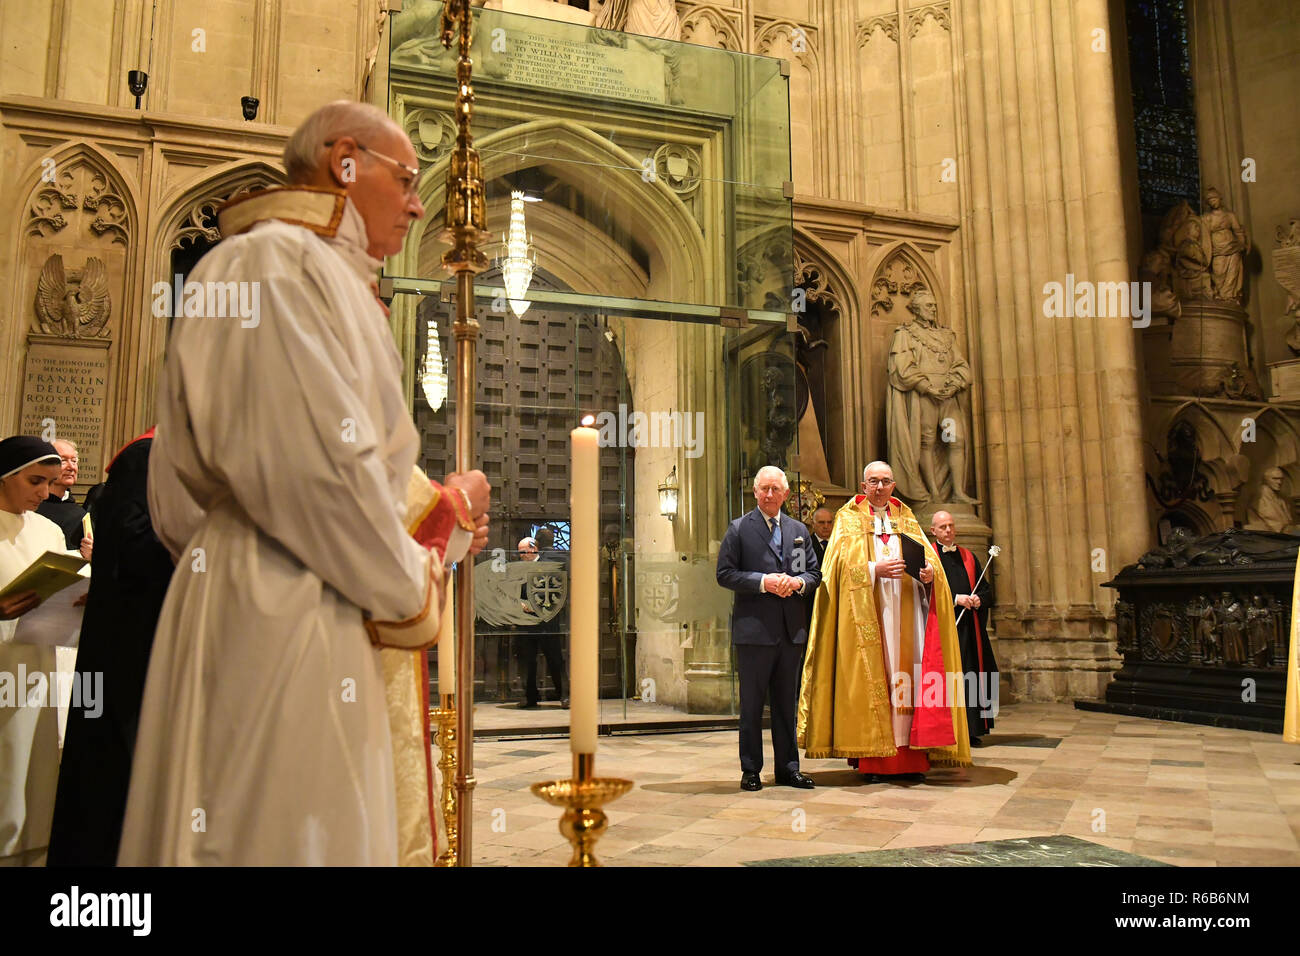 The Prince of Wales arrives for a service at Westminster Abbey in London to celebrate the contribution of Christians in the Middle East. Stock Photo